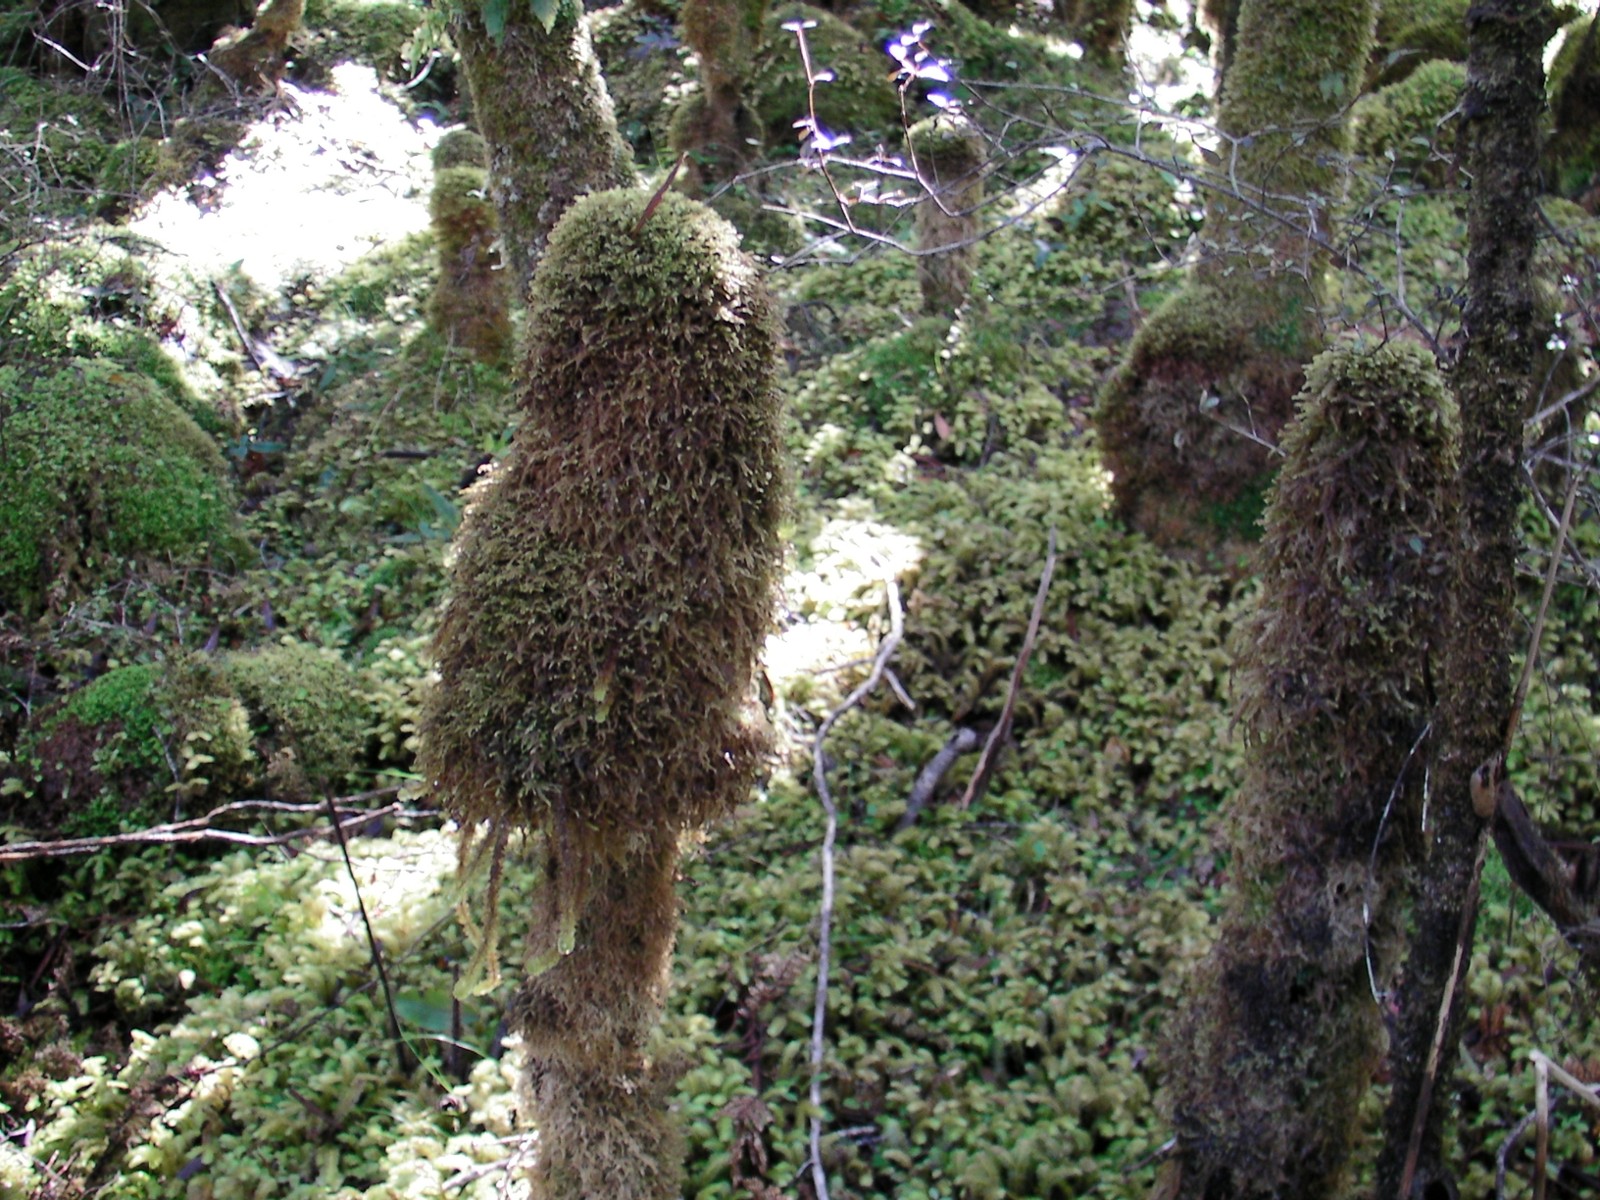 A picture of the Rakiura interior undergrowth. Moss, moss, moss - and did we mention, moss?